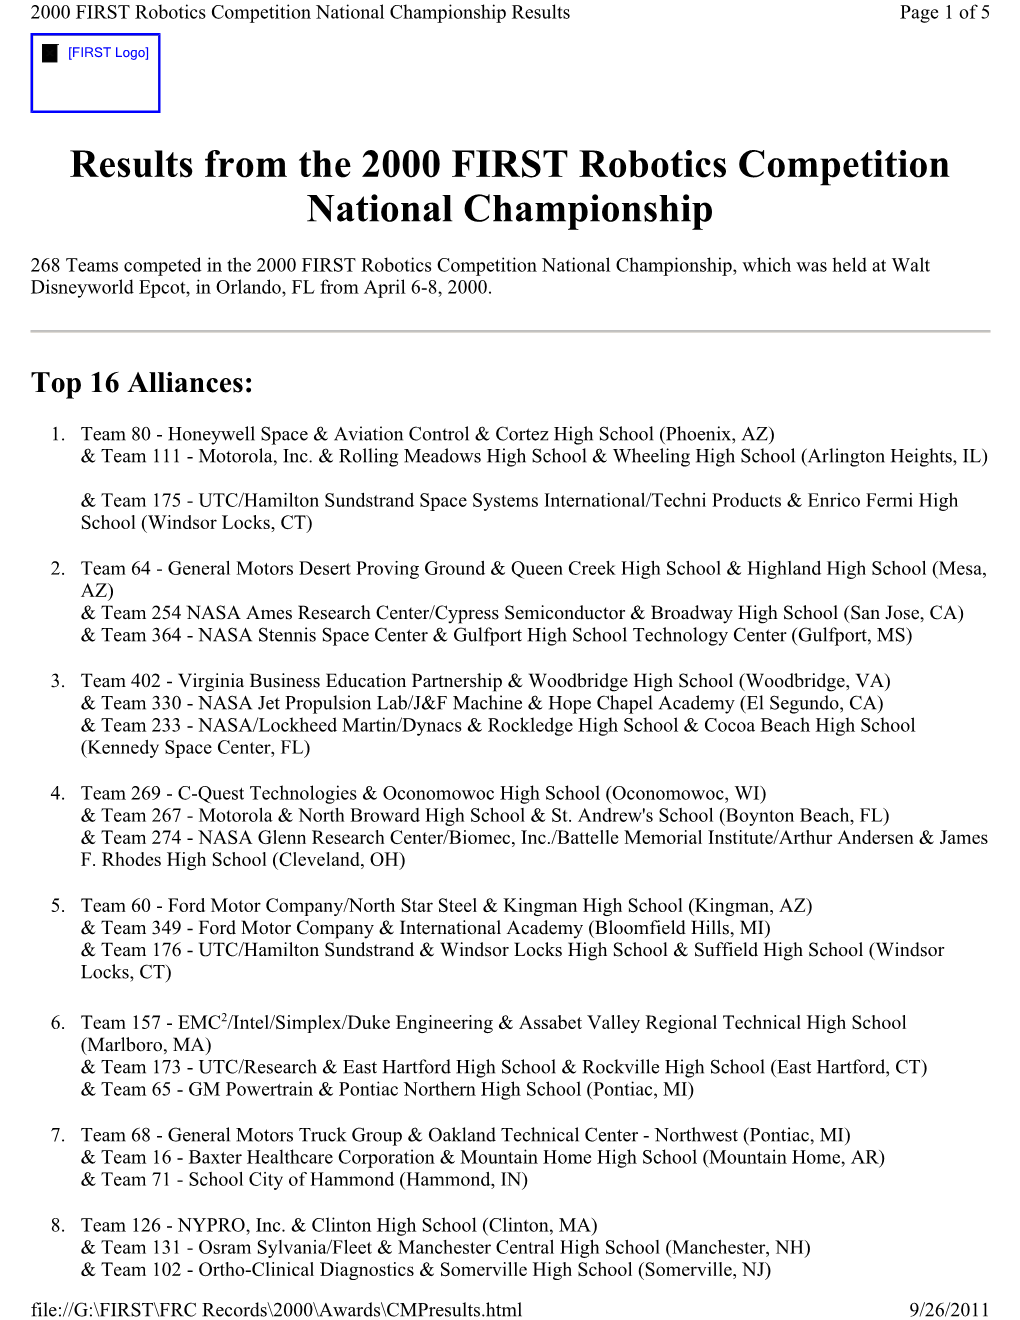 Results from the 2000 FIRST Robotics Competition National Championship